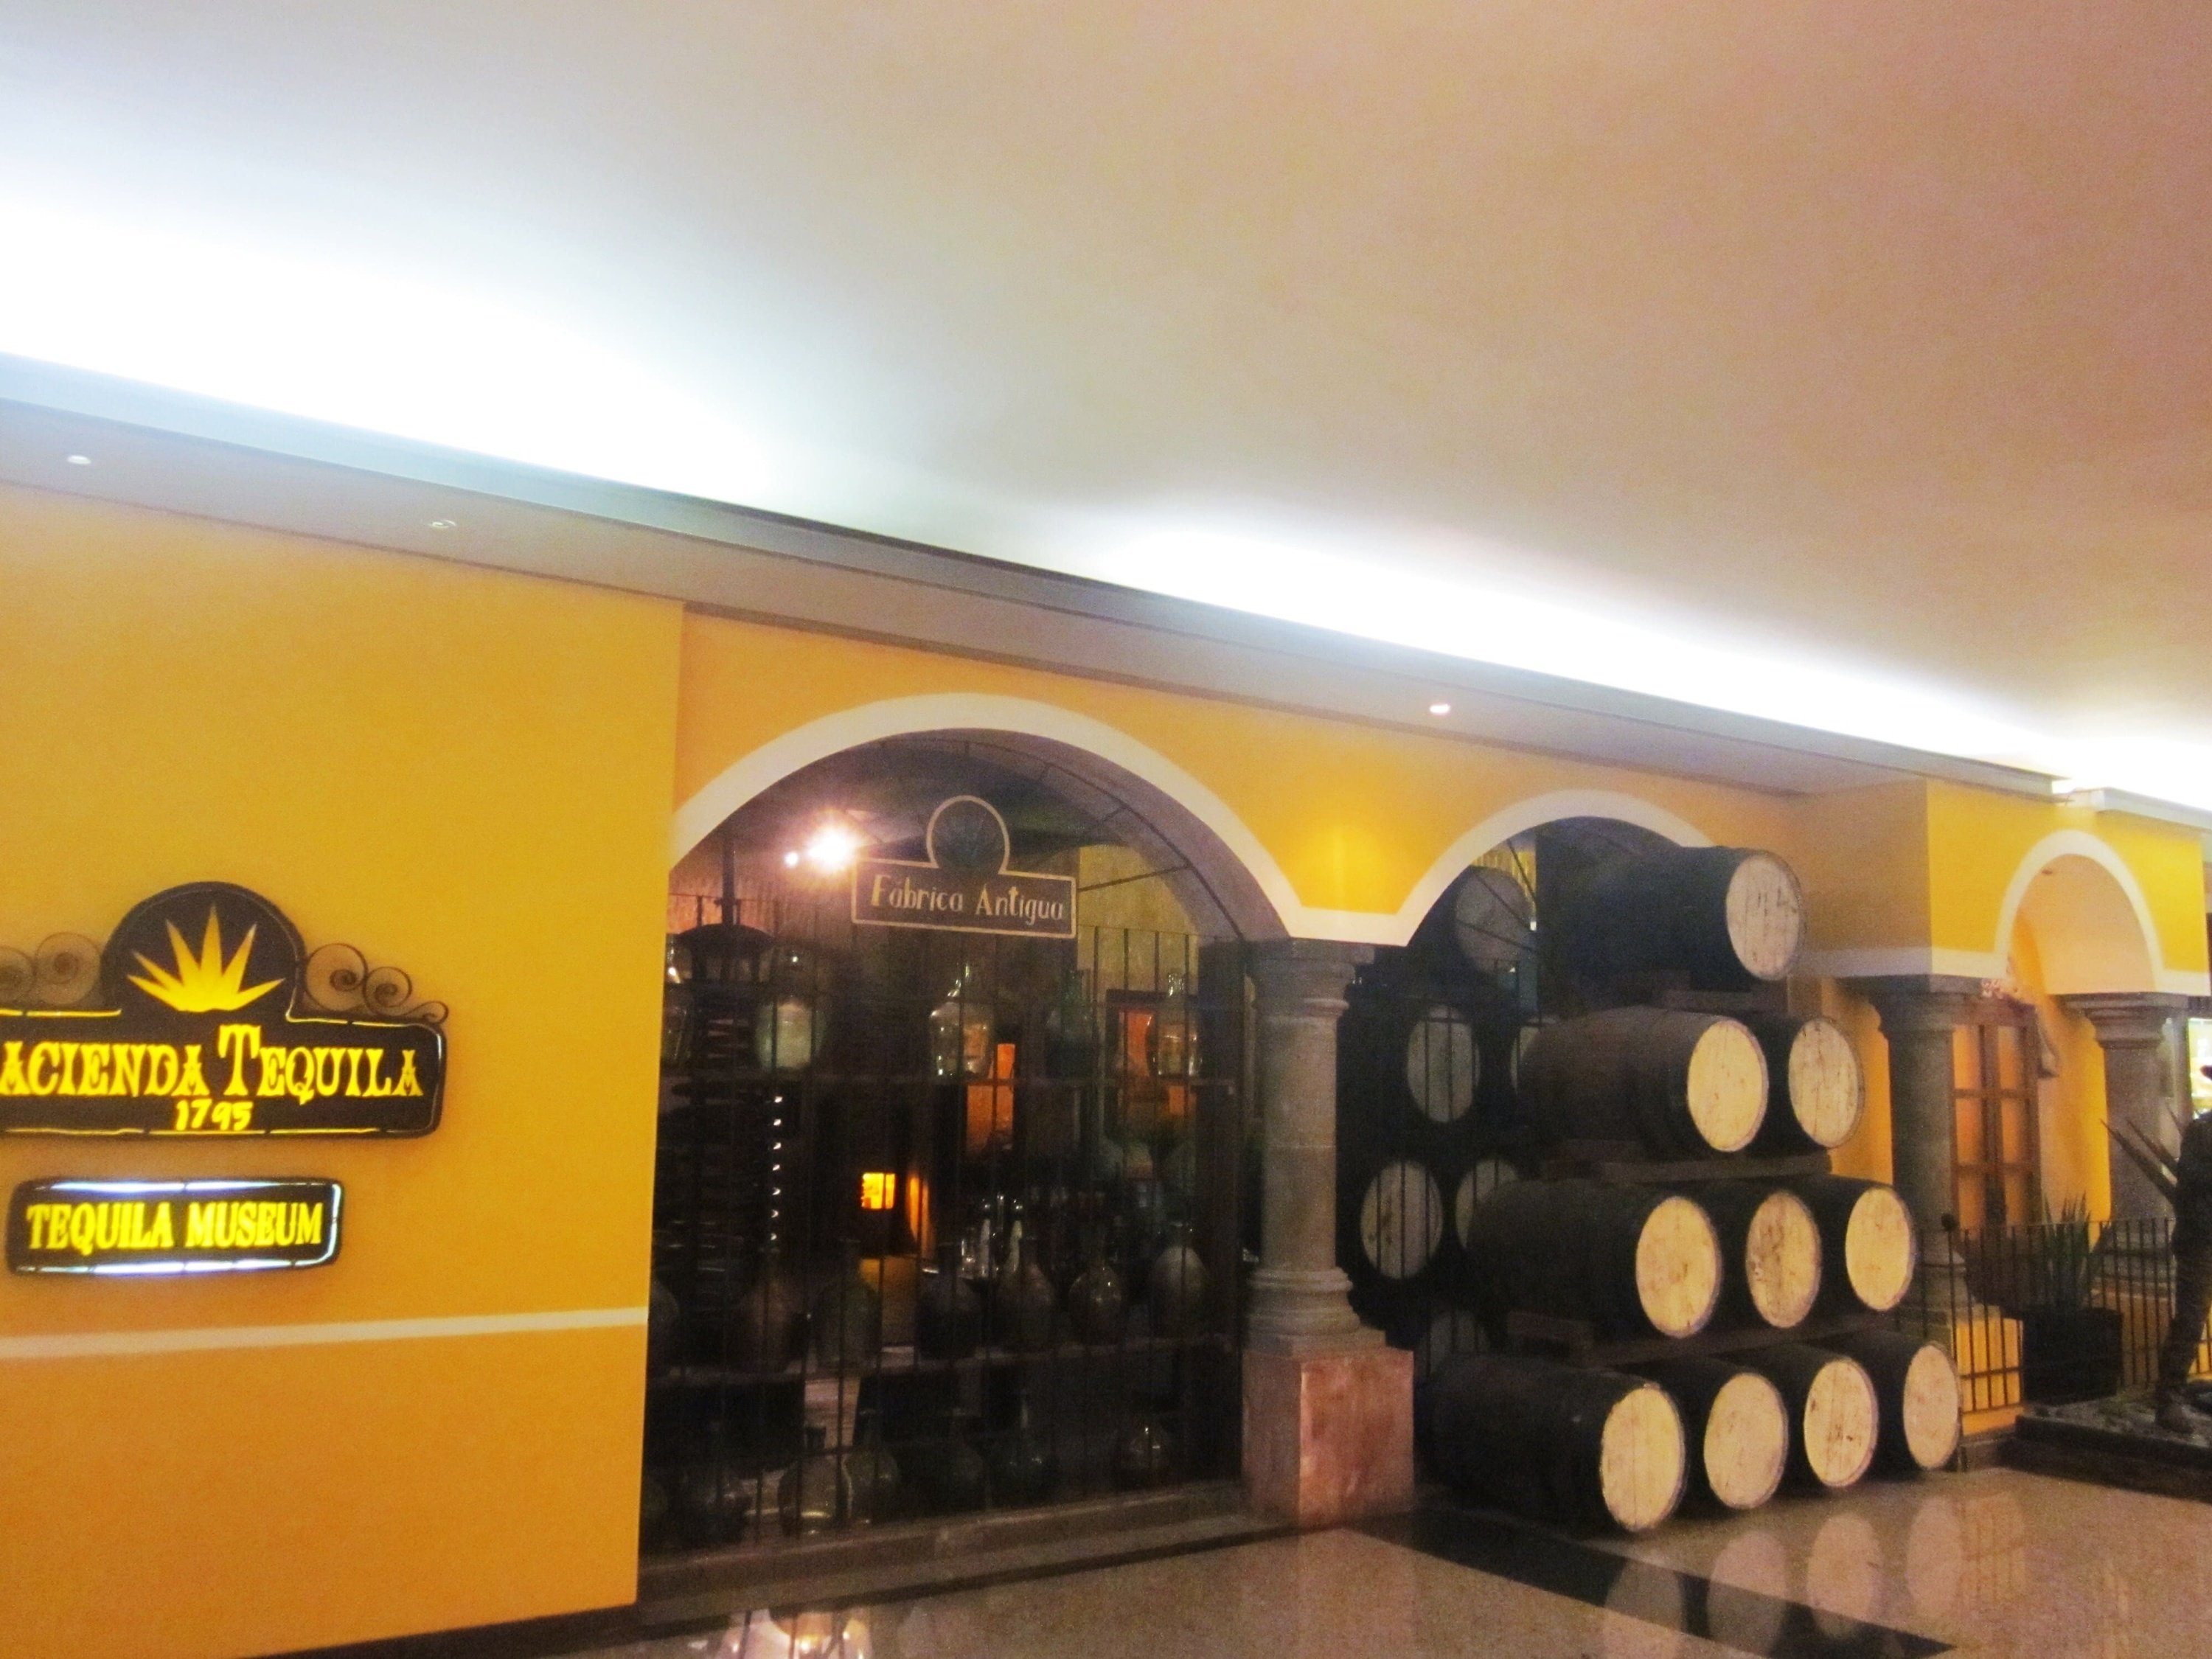 Image of the entrance of Hacienda Tequila and Tequila Museum